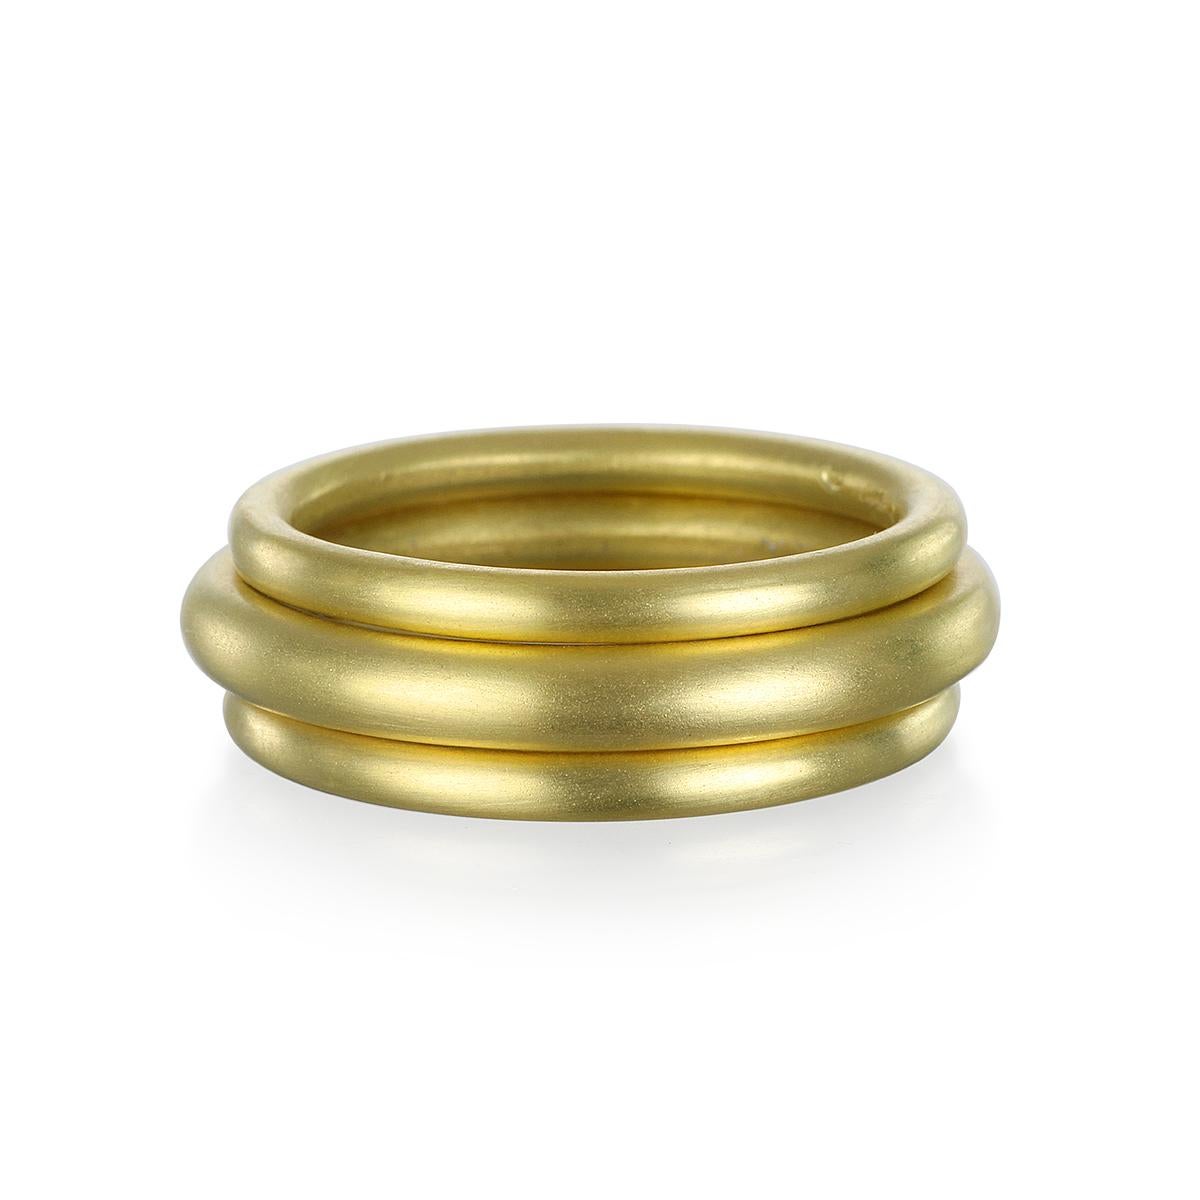 Handmade in 18 Karat Gold with a matte finish, Faye Kim's 3mm round band is classic, versatile, and a perennial favorite. Wear alone or stack to create your own unique style.

Width 3mm 
Size 7.5 (can be resized, please inquire for more info)

Made